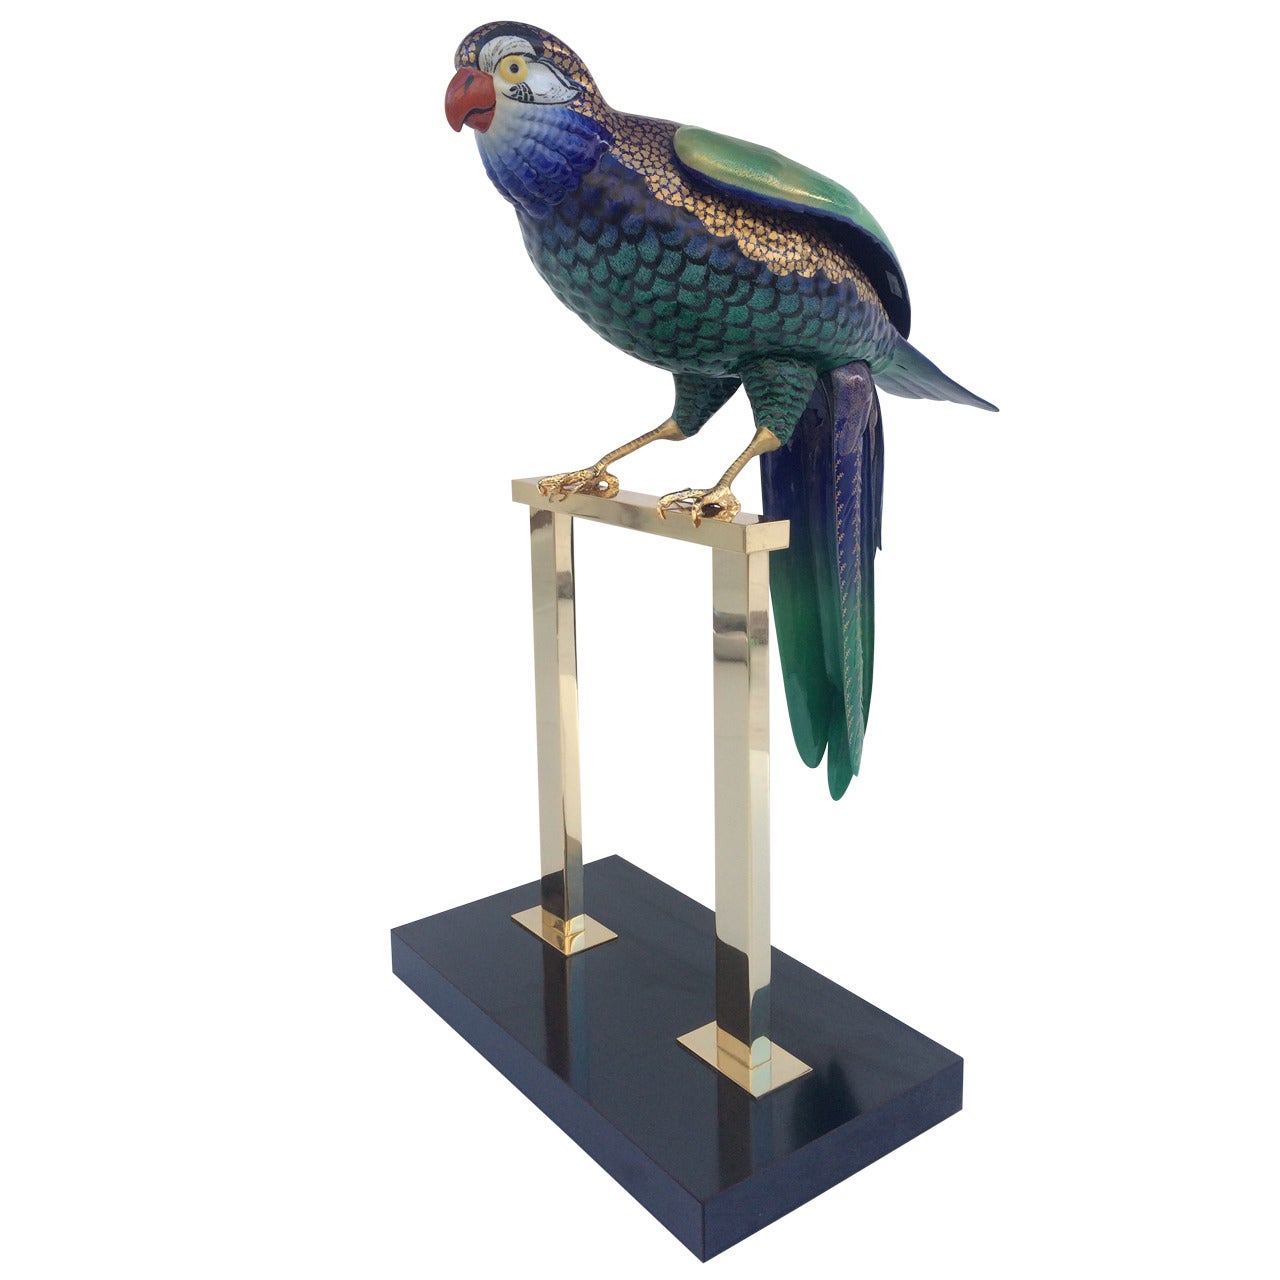 "Parrot" Sculpture Made by Oggetti of Italy and Designed by Mangani